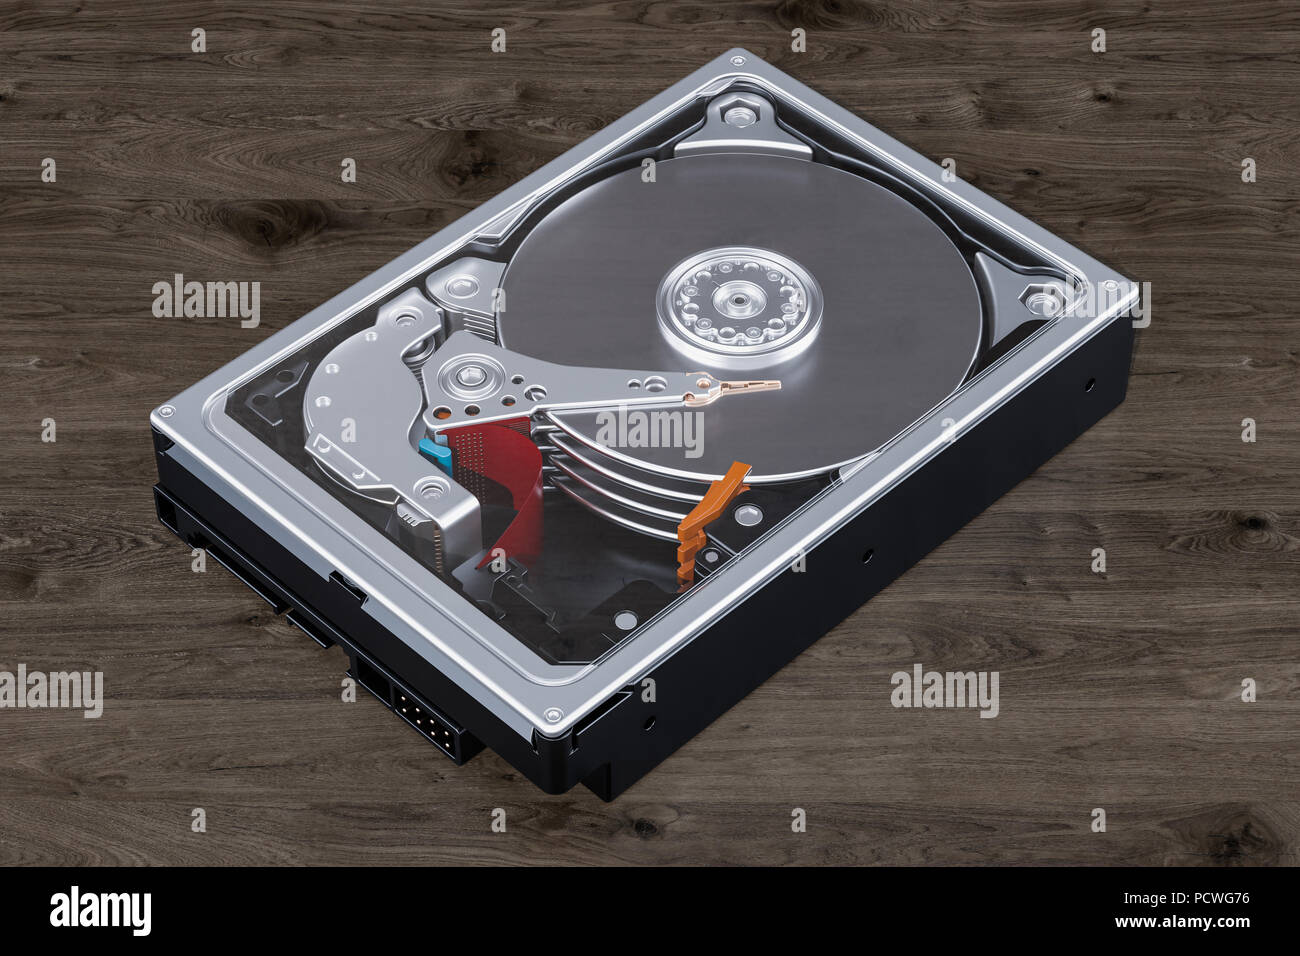 Hard Disk Drive (HDD) on the wooden background, 3D rendering Stock Photo